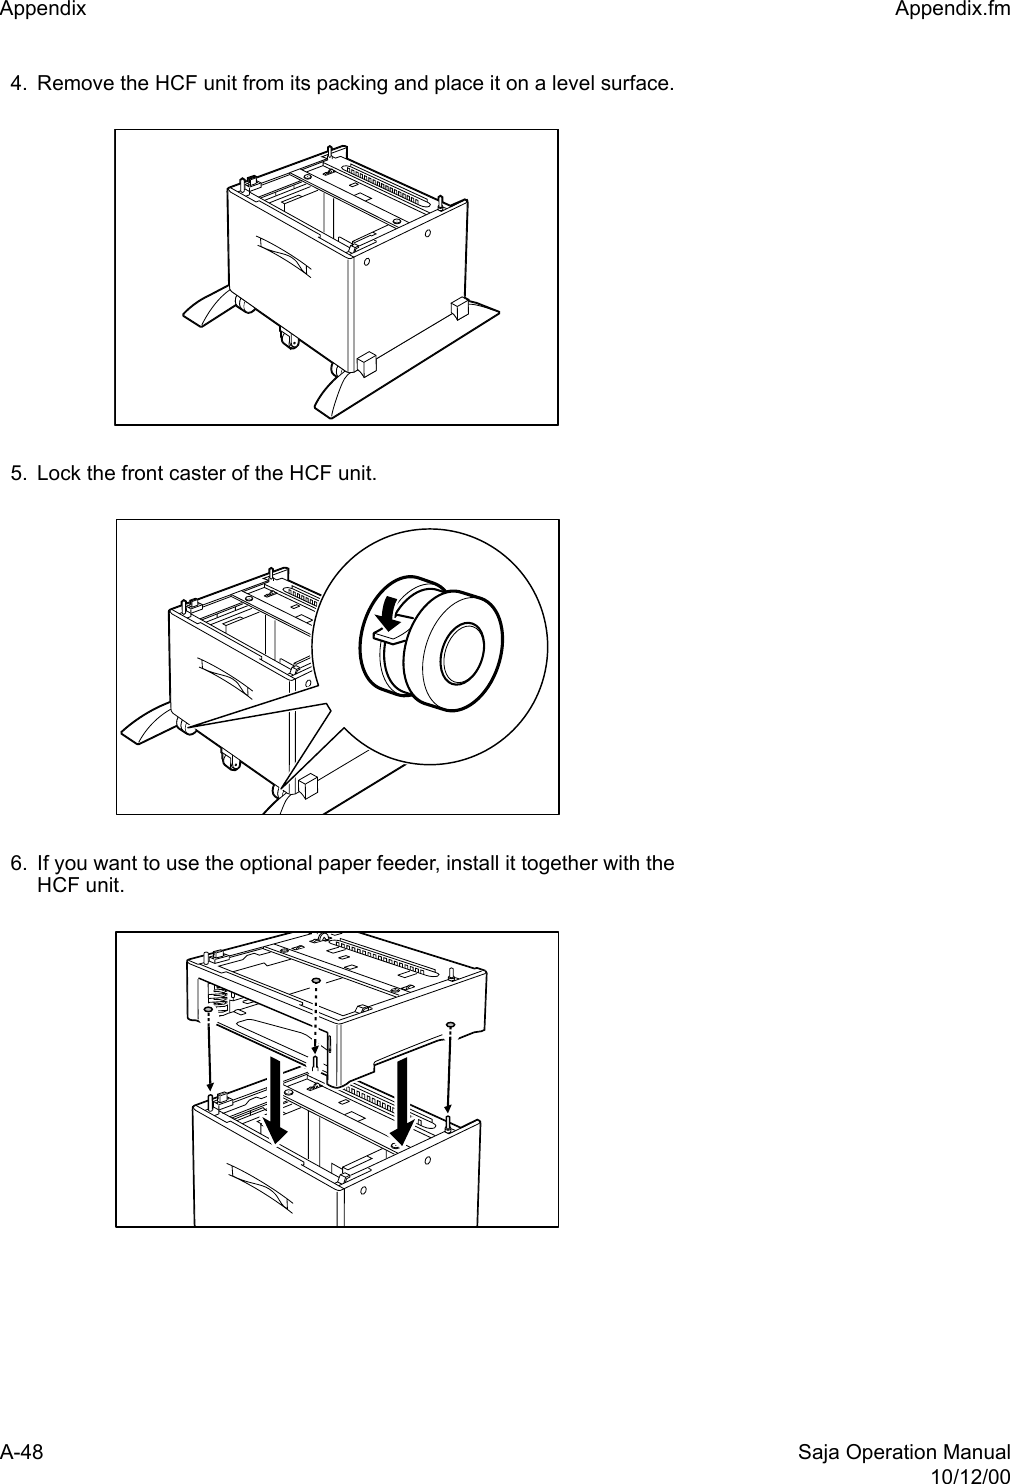 A-48 Saja Operation Manual10/12/00Appendix  Appendix.fm4. Remove the HCF unit from its packing and place it on a level surface.5. Lock the front caster of the HCF unit.6. If you want to use the optional paper feeder, install it together with theHCF unit. 